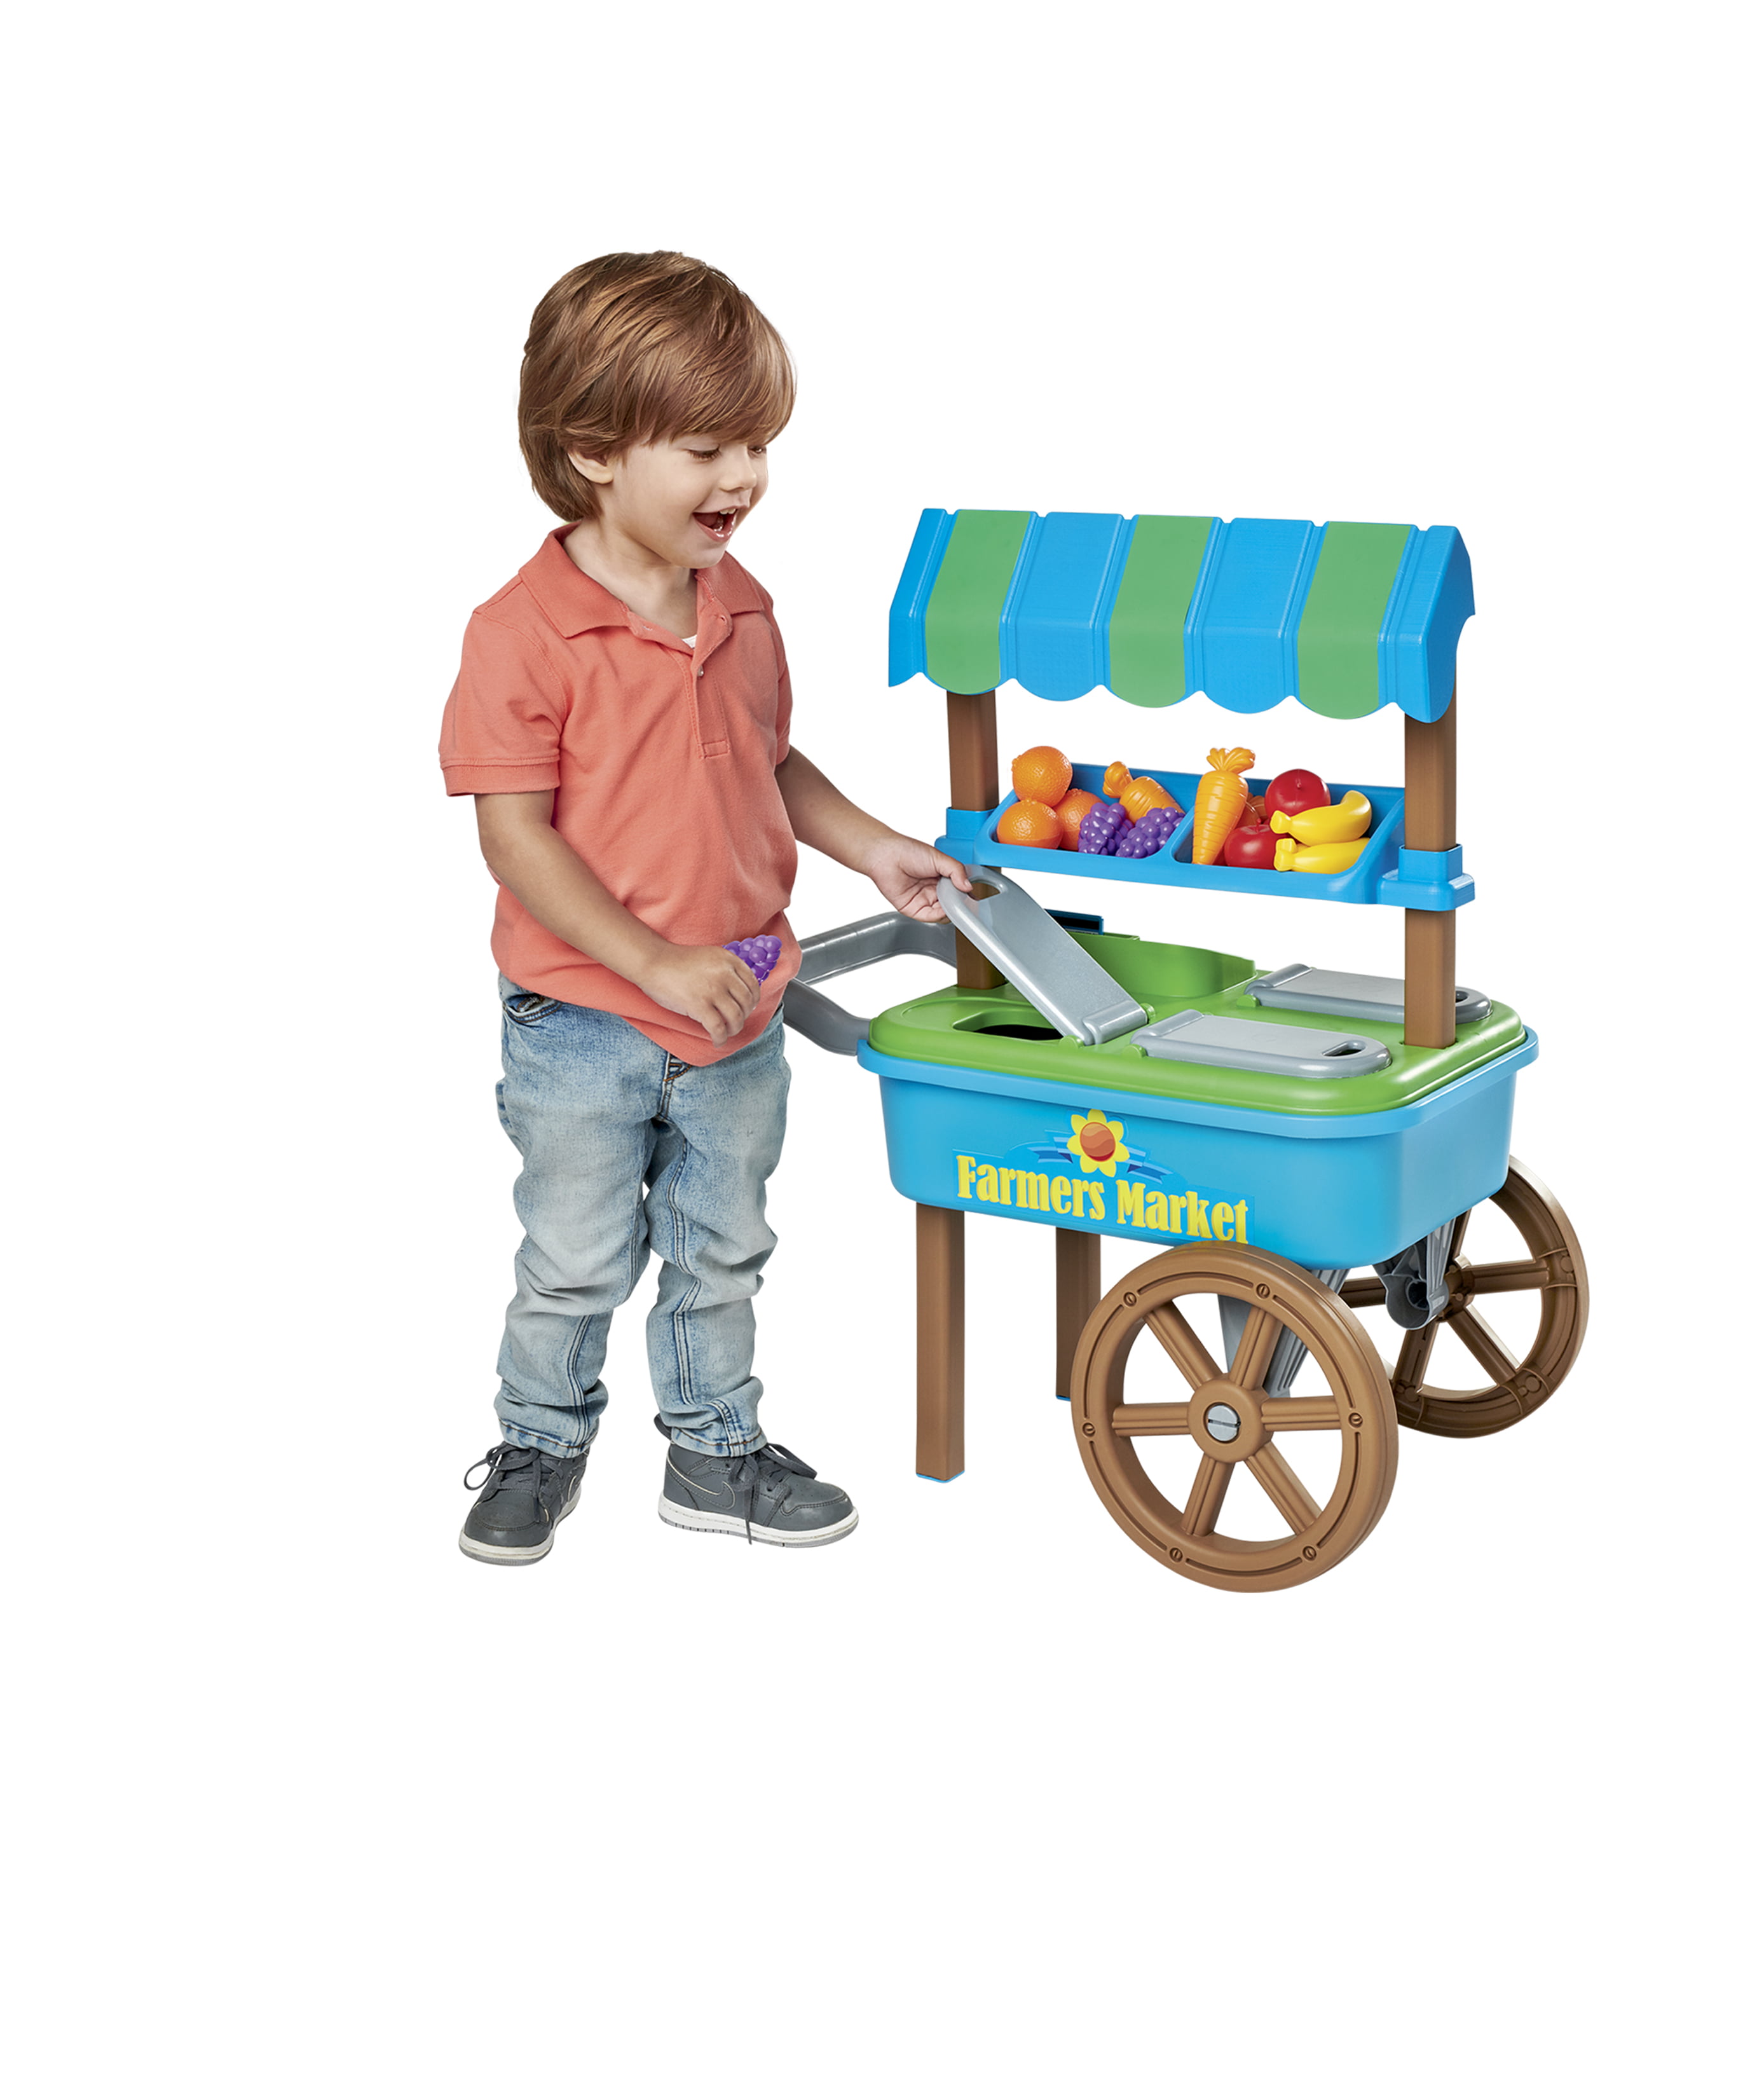 Tiny Land Ice Cream Cart 47 Inches for for sale online Portable Play and 4 Pretend Food 